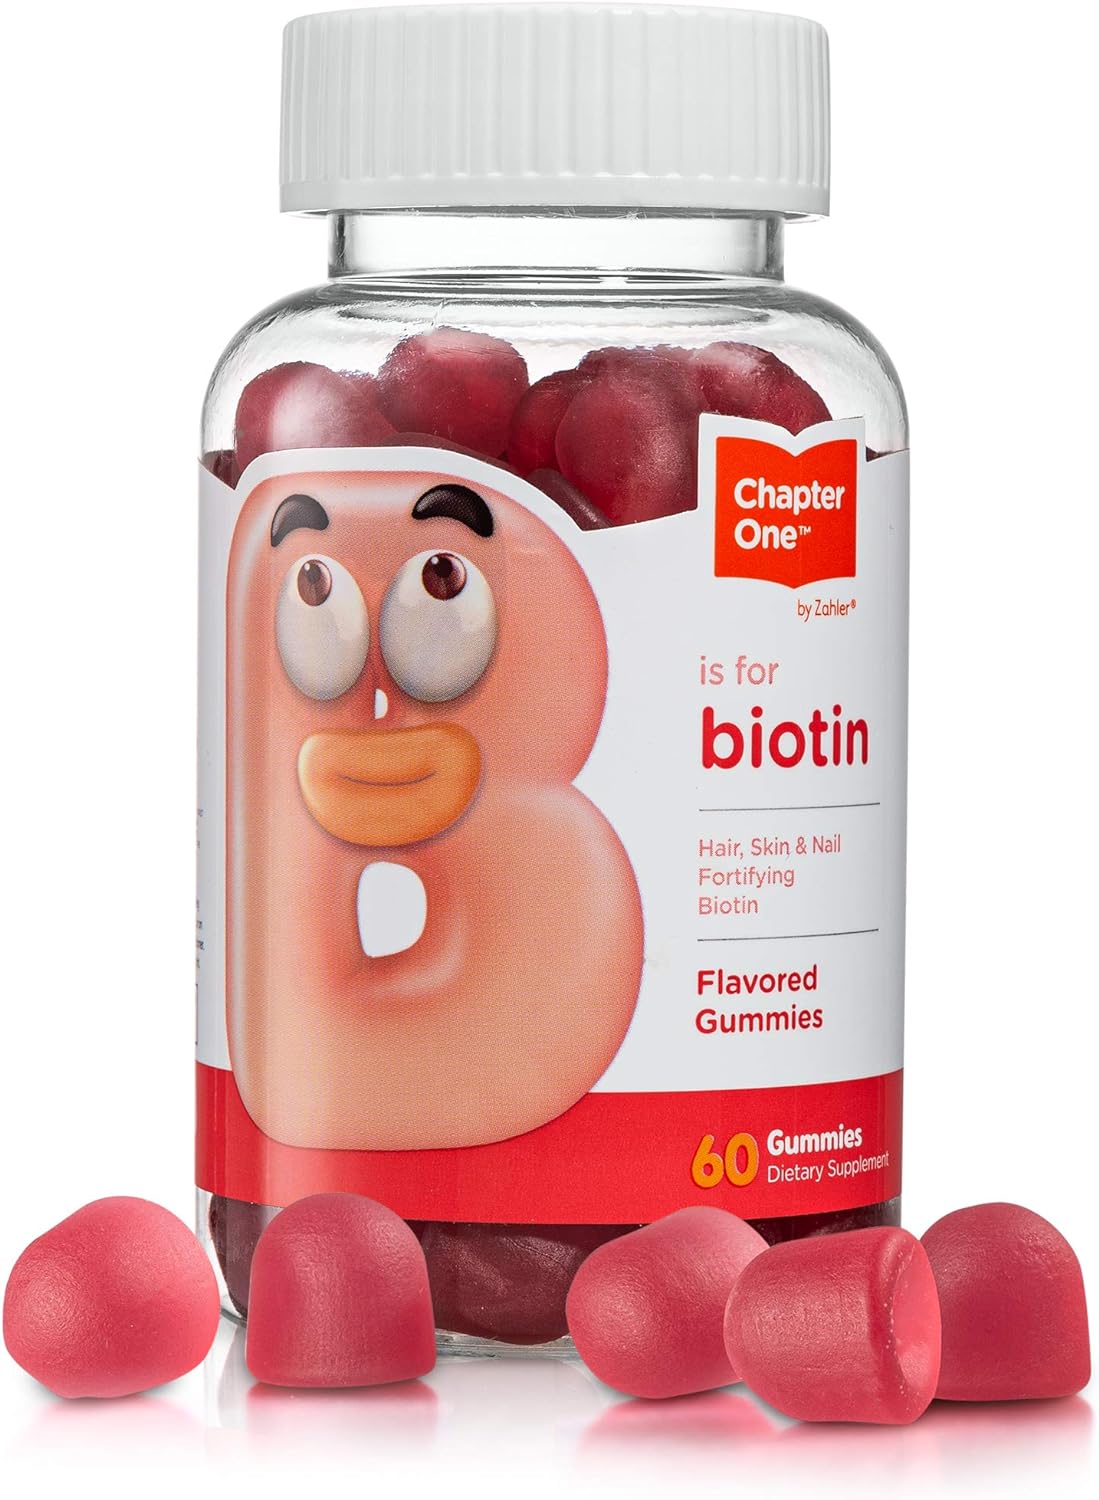 Zahler Chapter One Biotin Gummies, Hair Skin and Nails Fortifying Biot